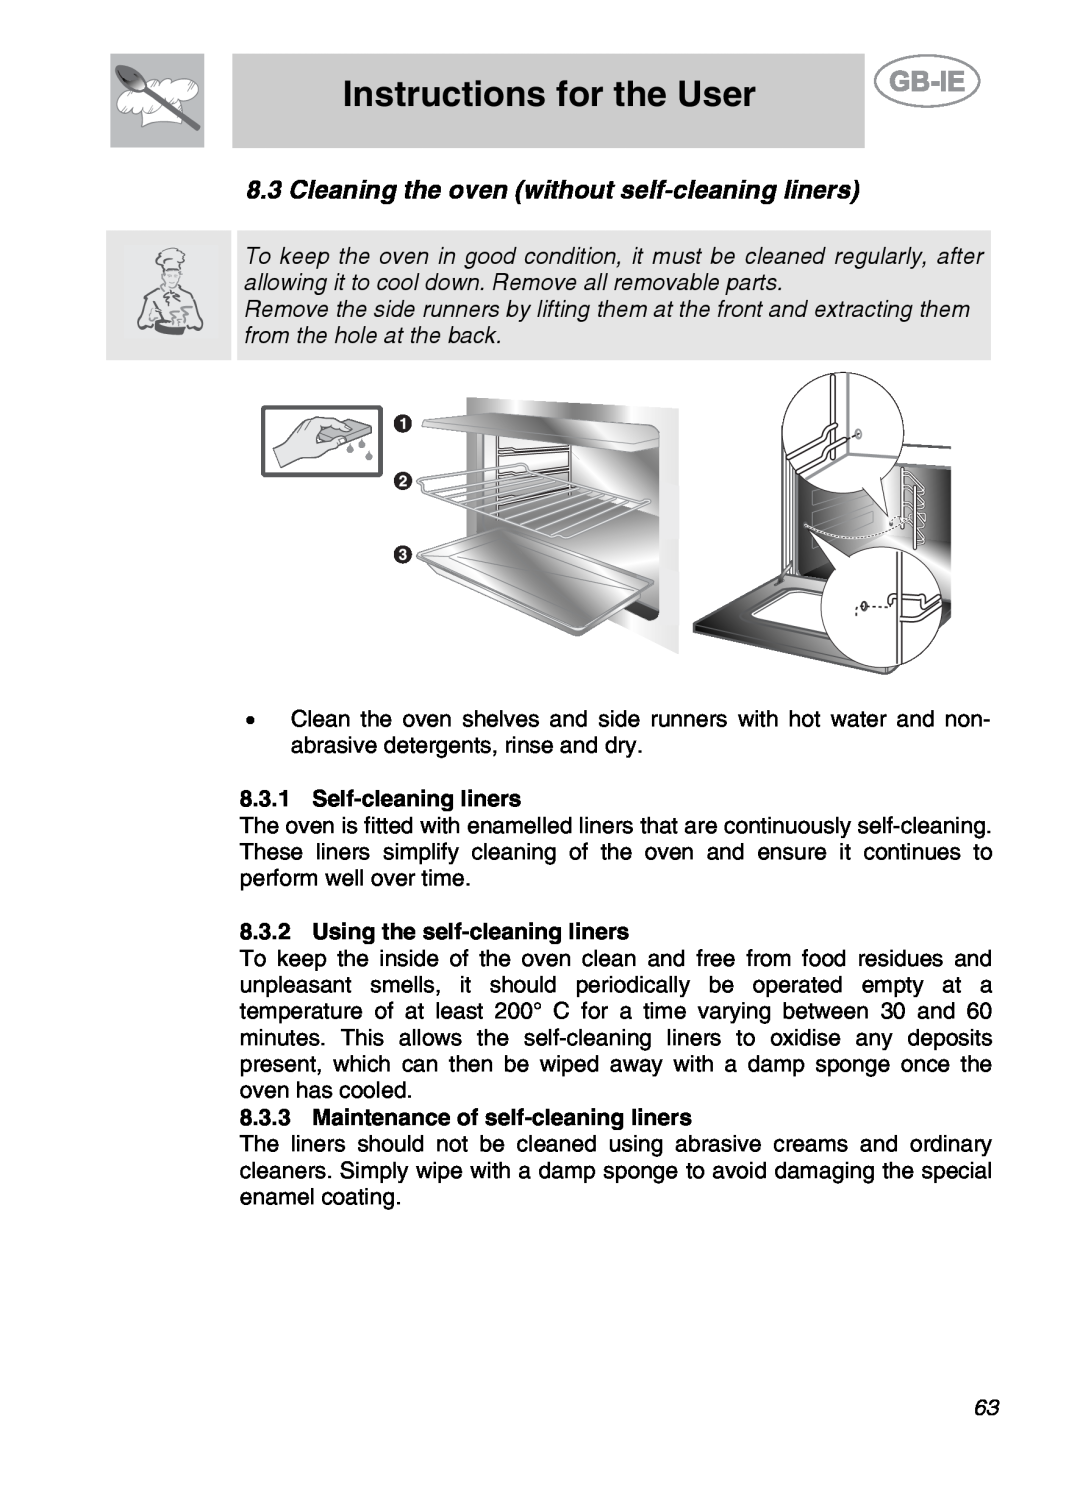 Smeg CS19ID-6, CS19IDA-6 Cleaning the oven without self-cleaning liners, Instructions for the User, Self-cleaning liners 